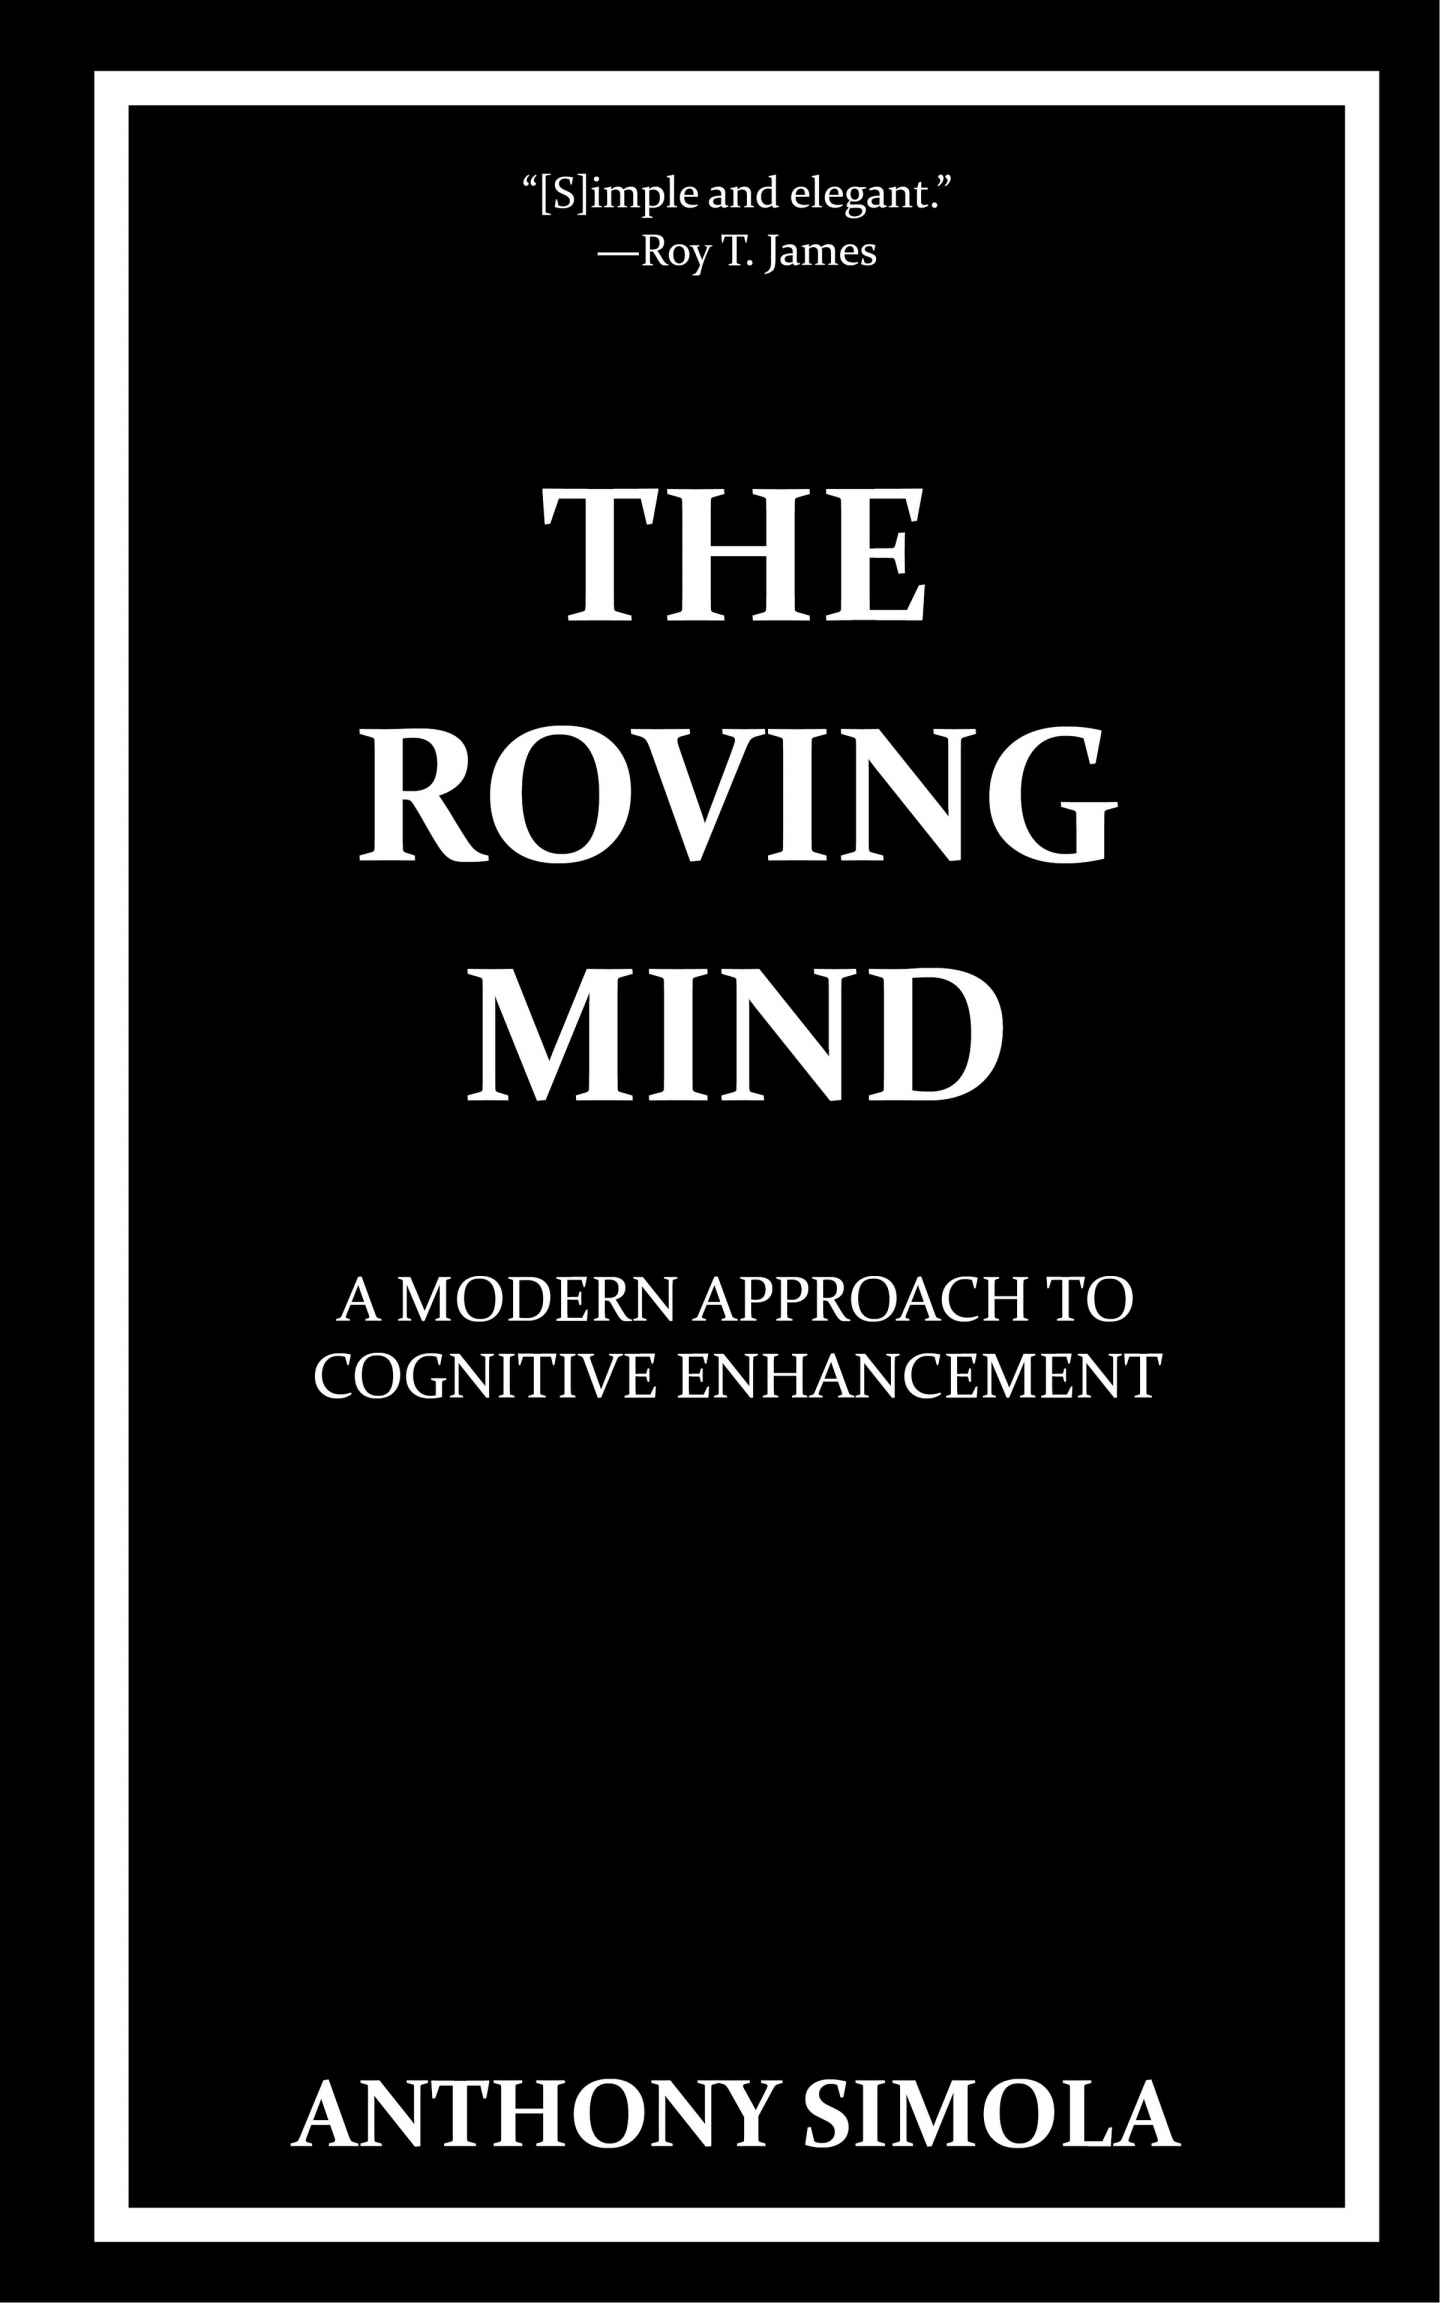 FREE: The Roving Mind: A Modern Approach to Cognitive Enhancement by Anthony Simola by Anthony Simola